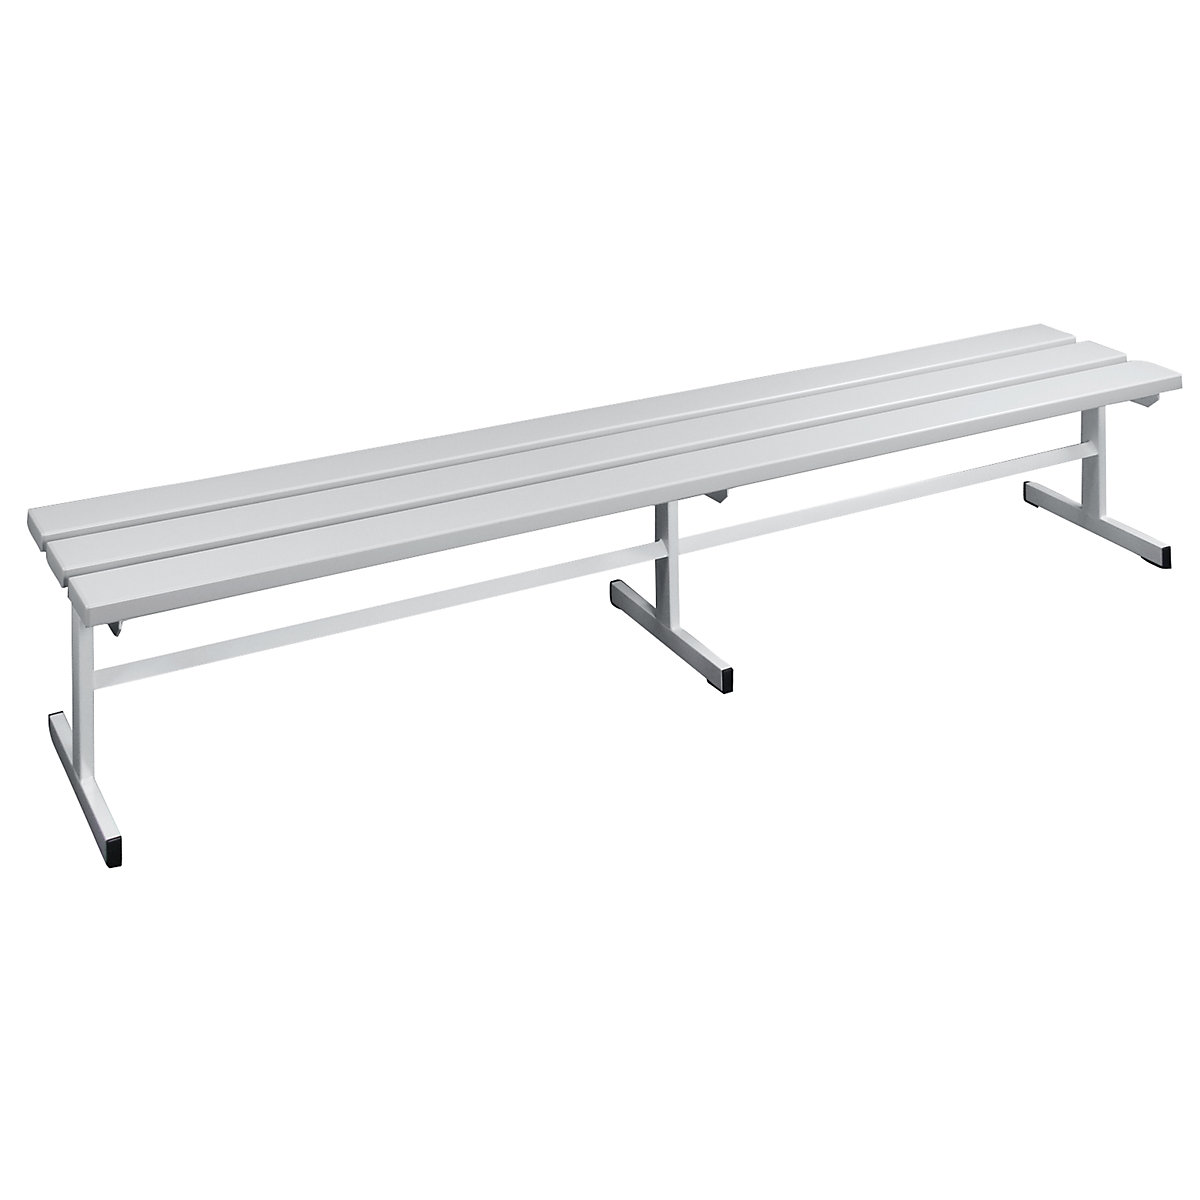 Wolf – Cloakroom bench, single sided seat, light grey, length 2000 mm